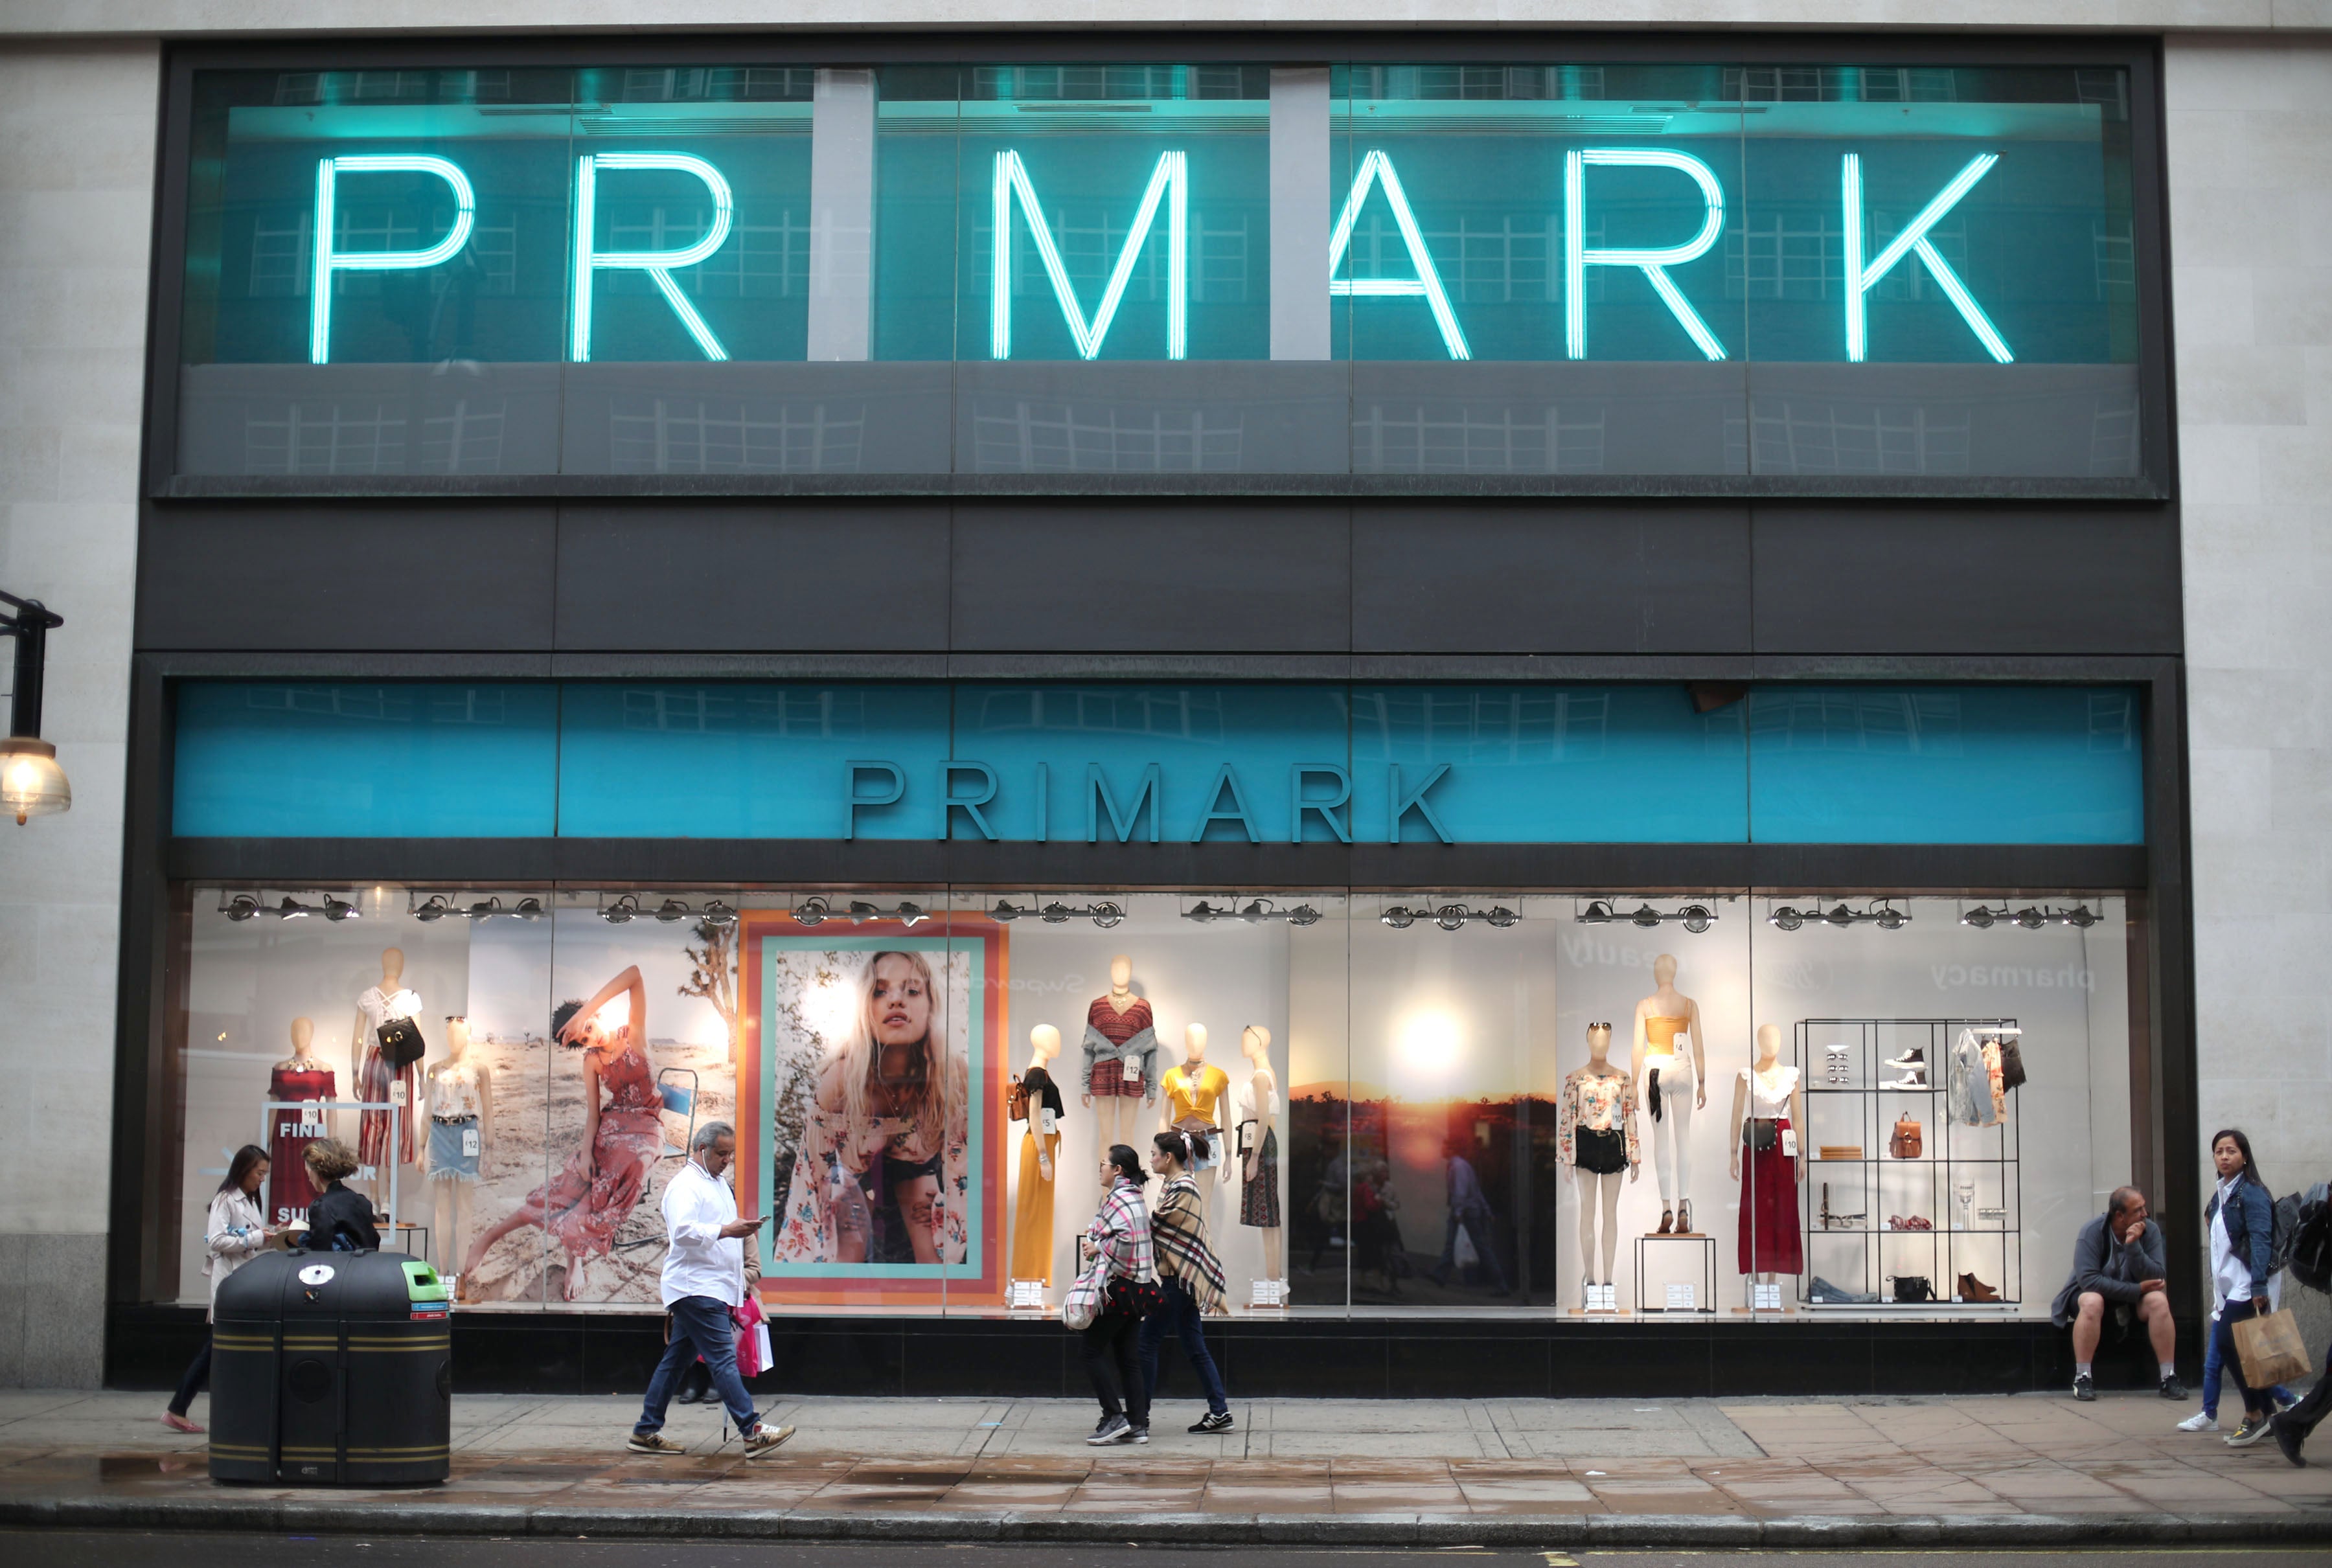 Primark launched its website in April